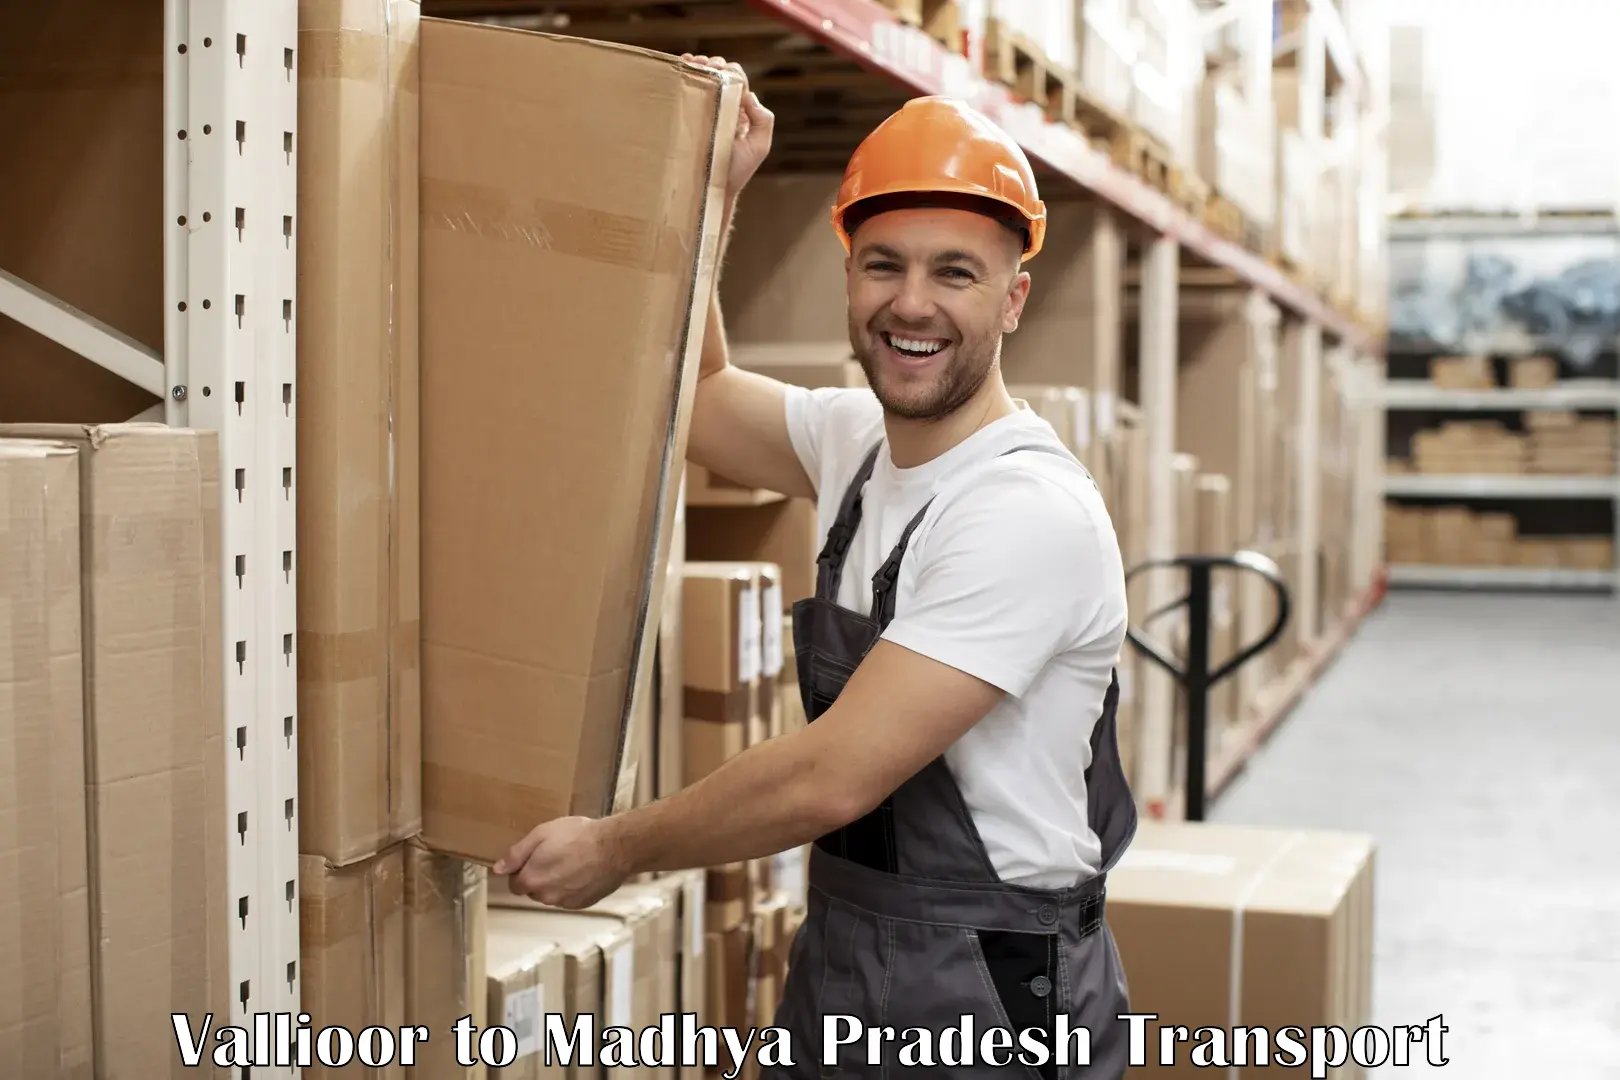 Domestic goods transportation services in Vallioor to Indore